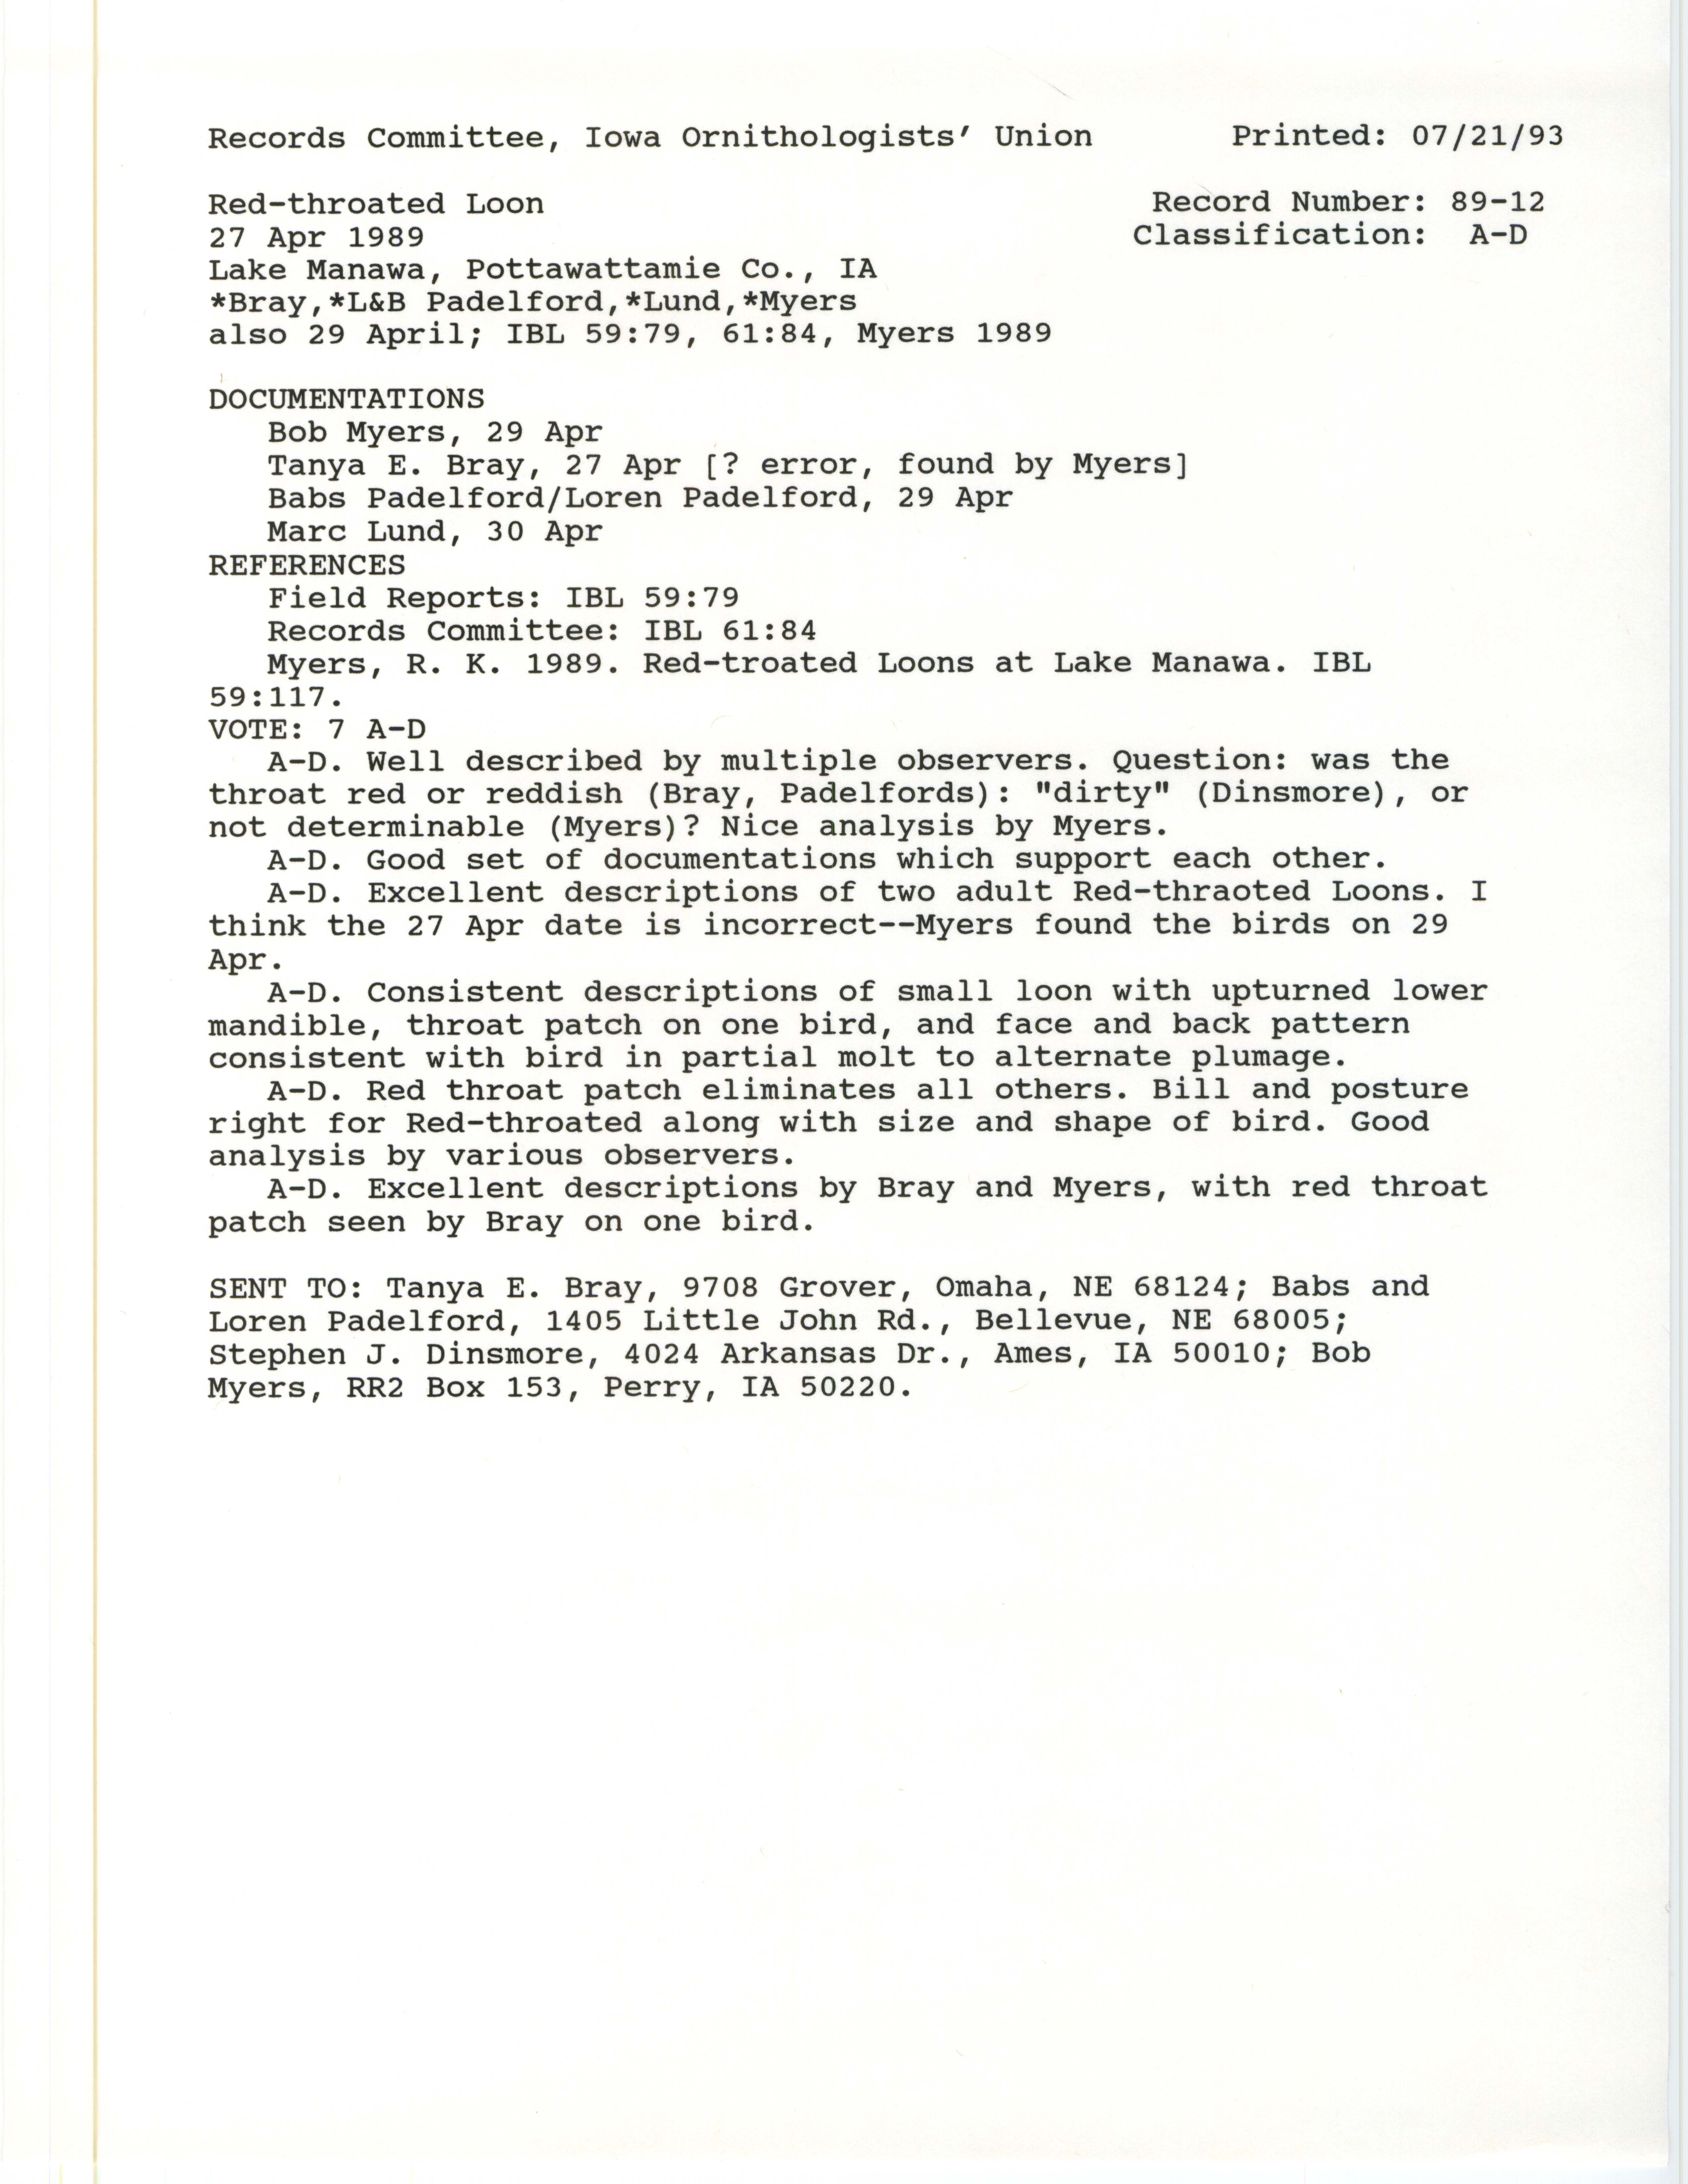 Records Committee review for rare bird sighting of Red-throated Loon at Lake Manawa, 1989